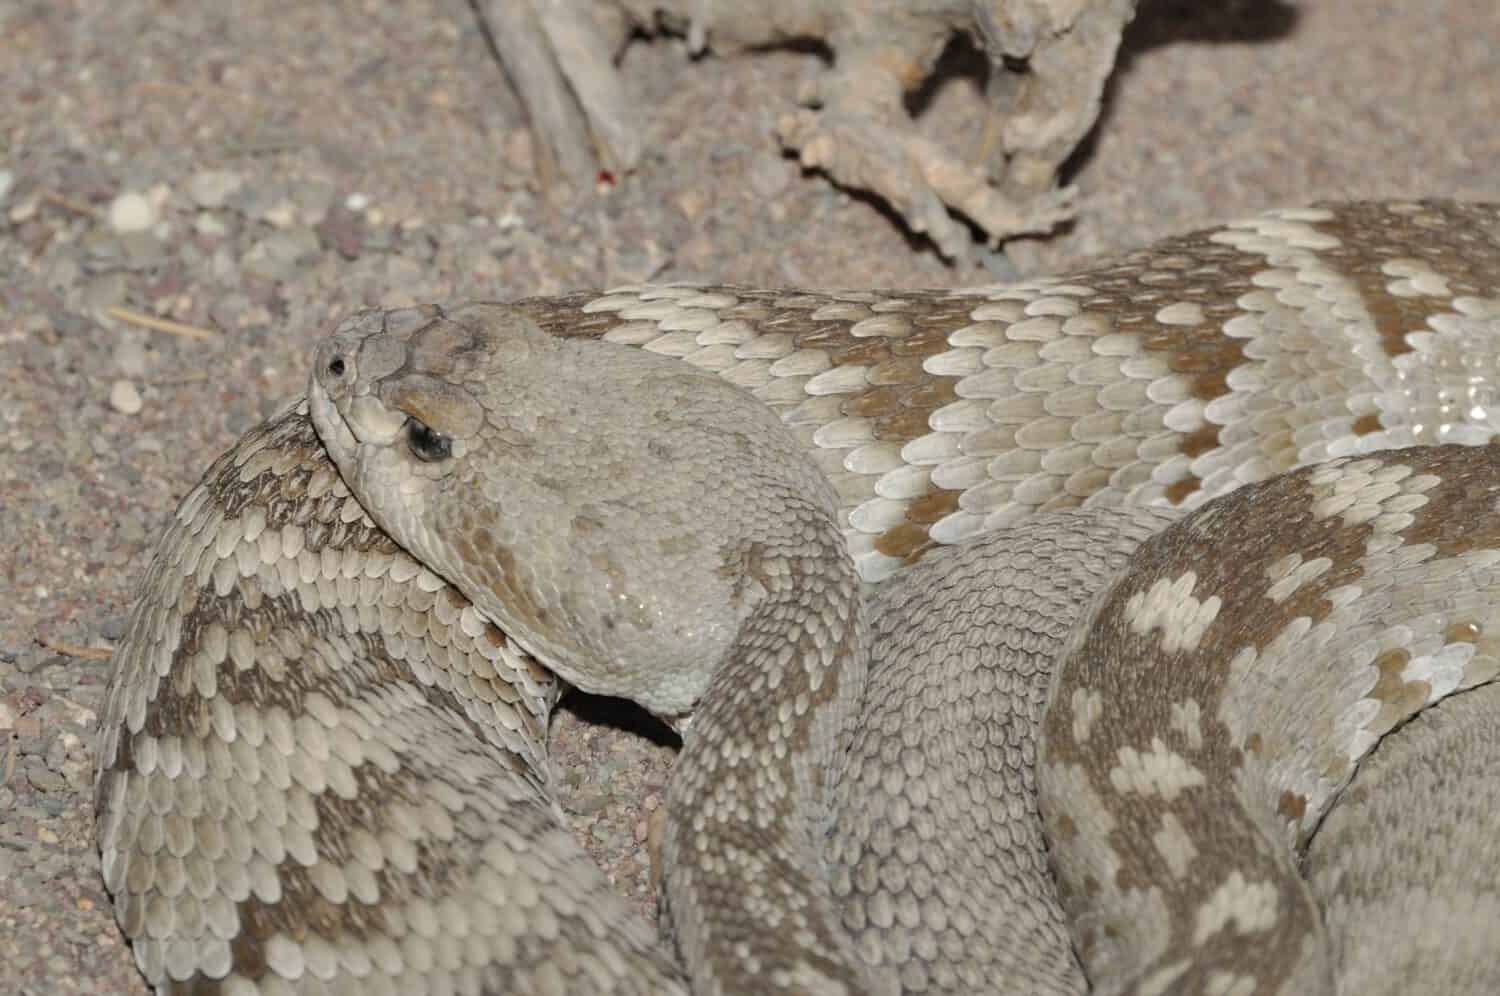 Black-tailed rattlesnake from the Chihuahuan Desert of Coahuila, Mexico